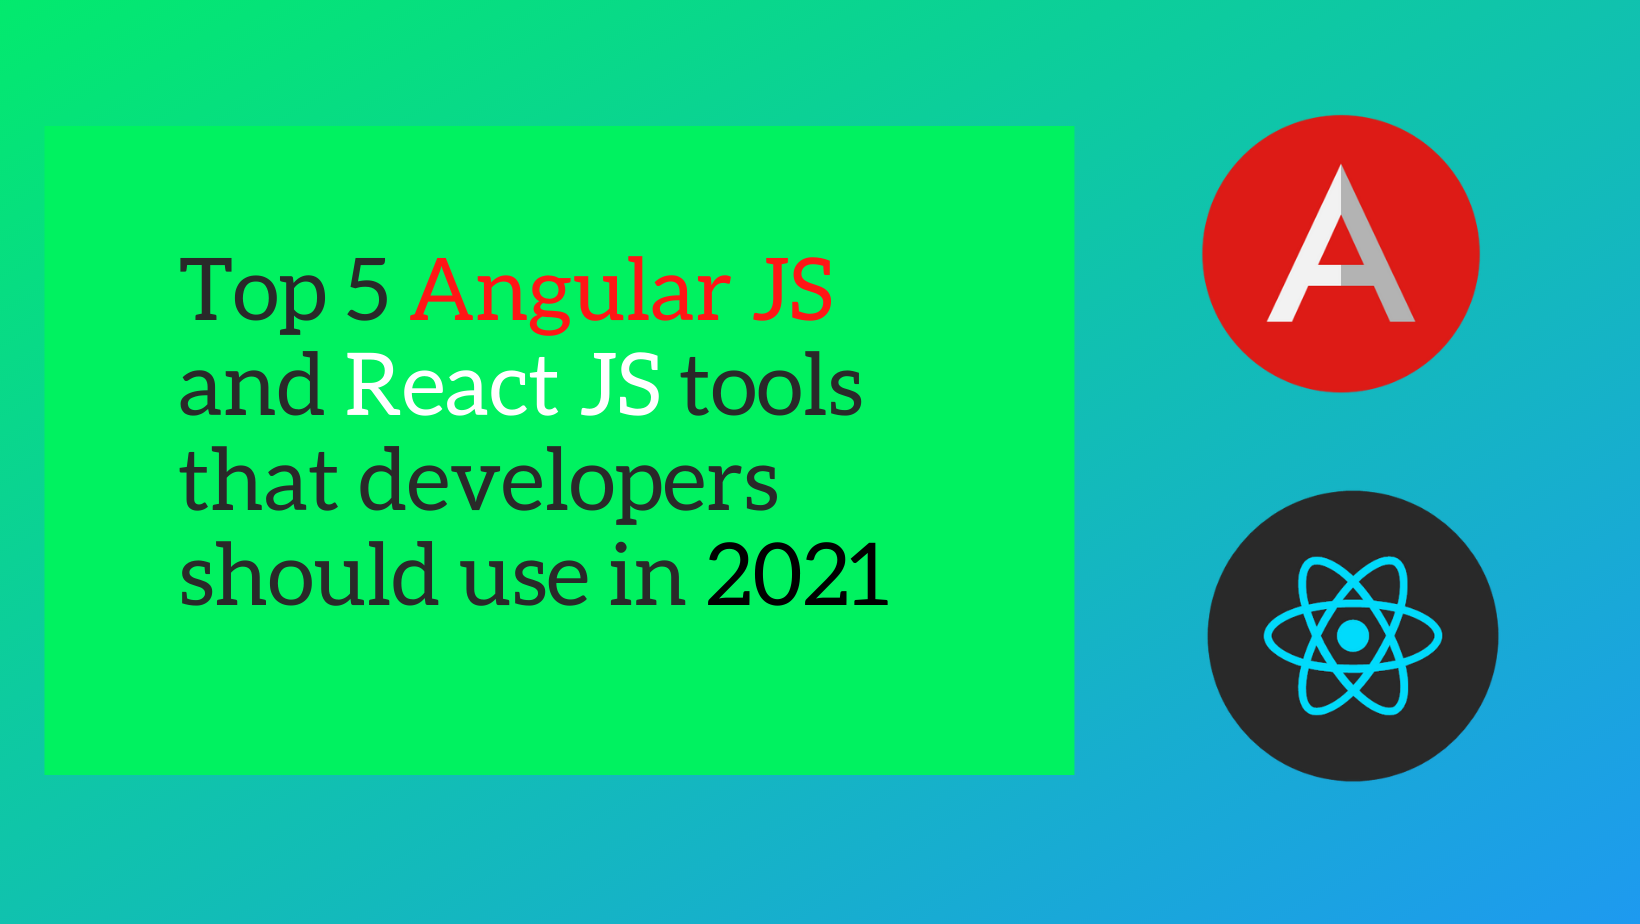 Top 5 Angular JS and React JS tools that developers should use in 2021